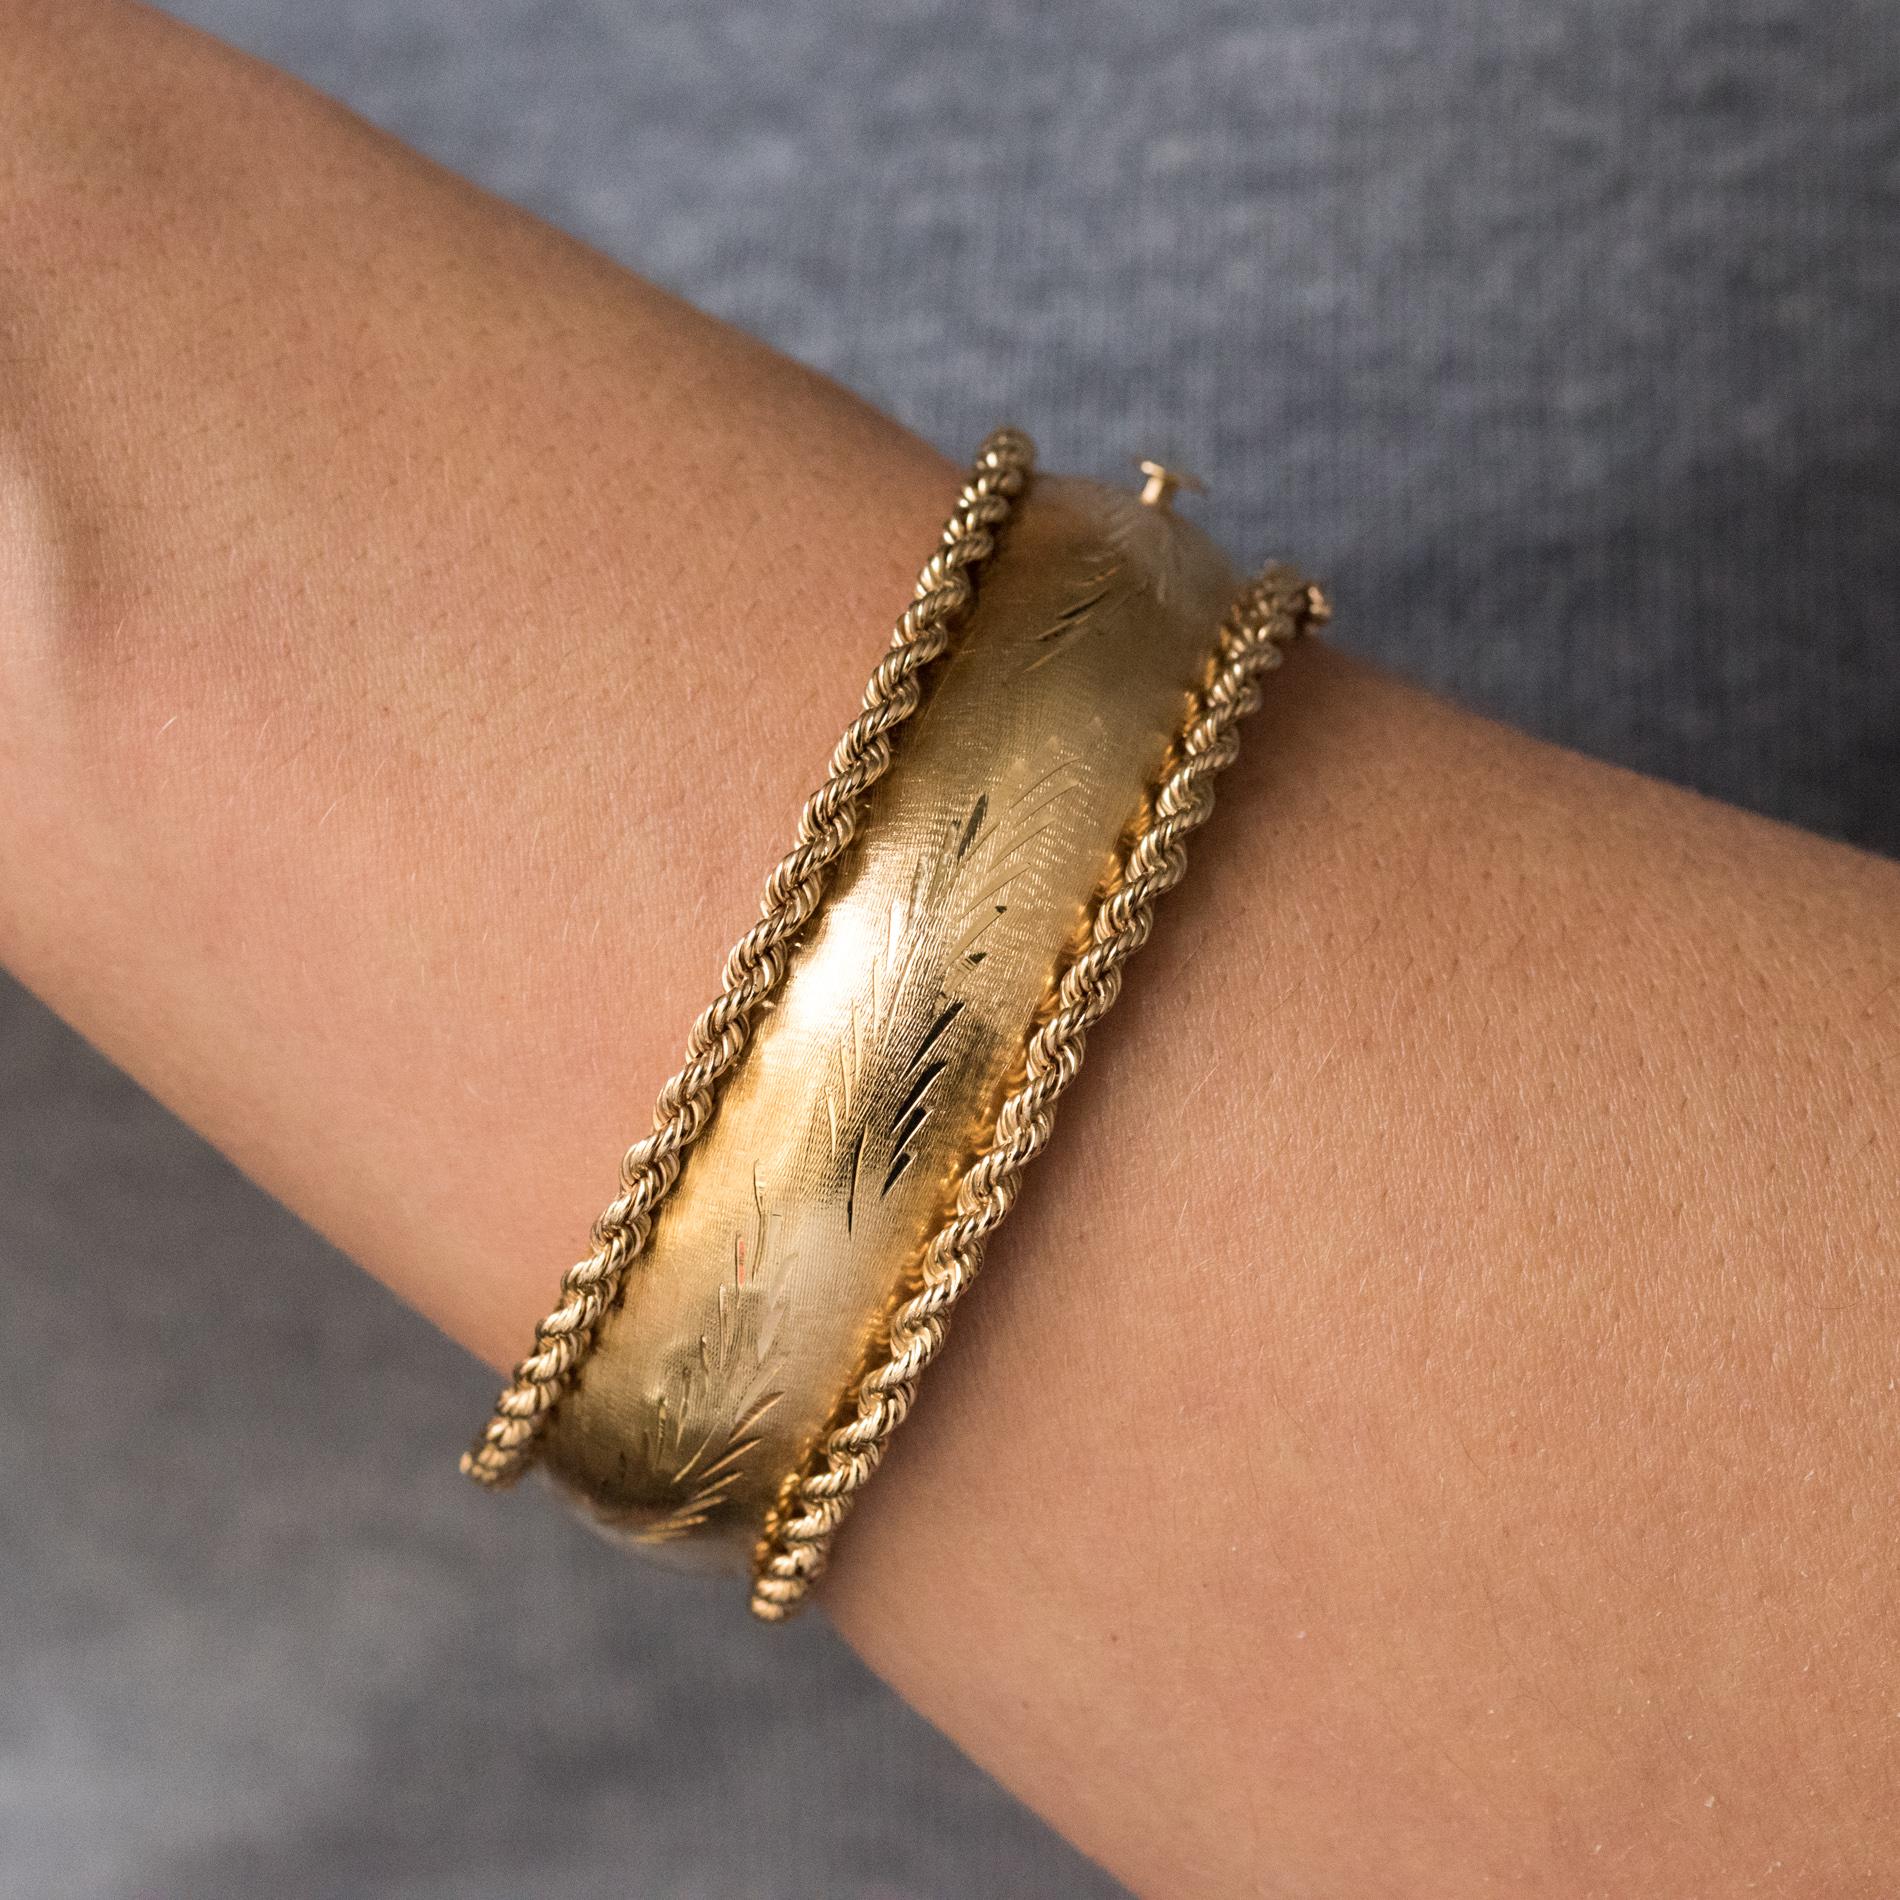 Bracelet in 14 karats yellow gold, shell hallmark.
Rigid, this retro bracelet is chiseled all around with a plant motif on amati background and bordered on both sides of a twist. It is opening on one side. The clasp is ratchet with a security